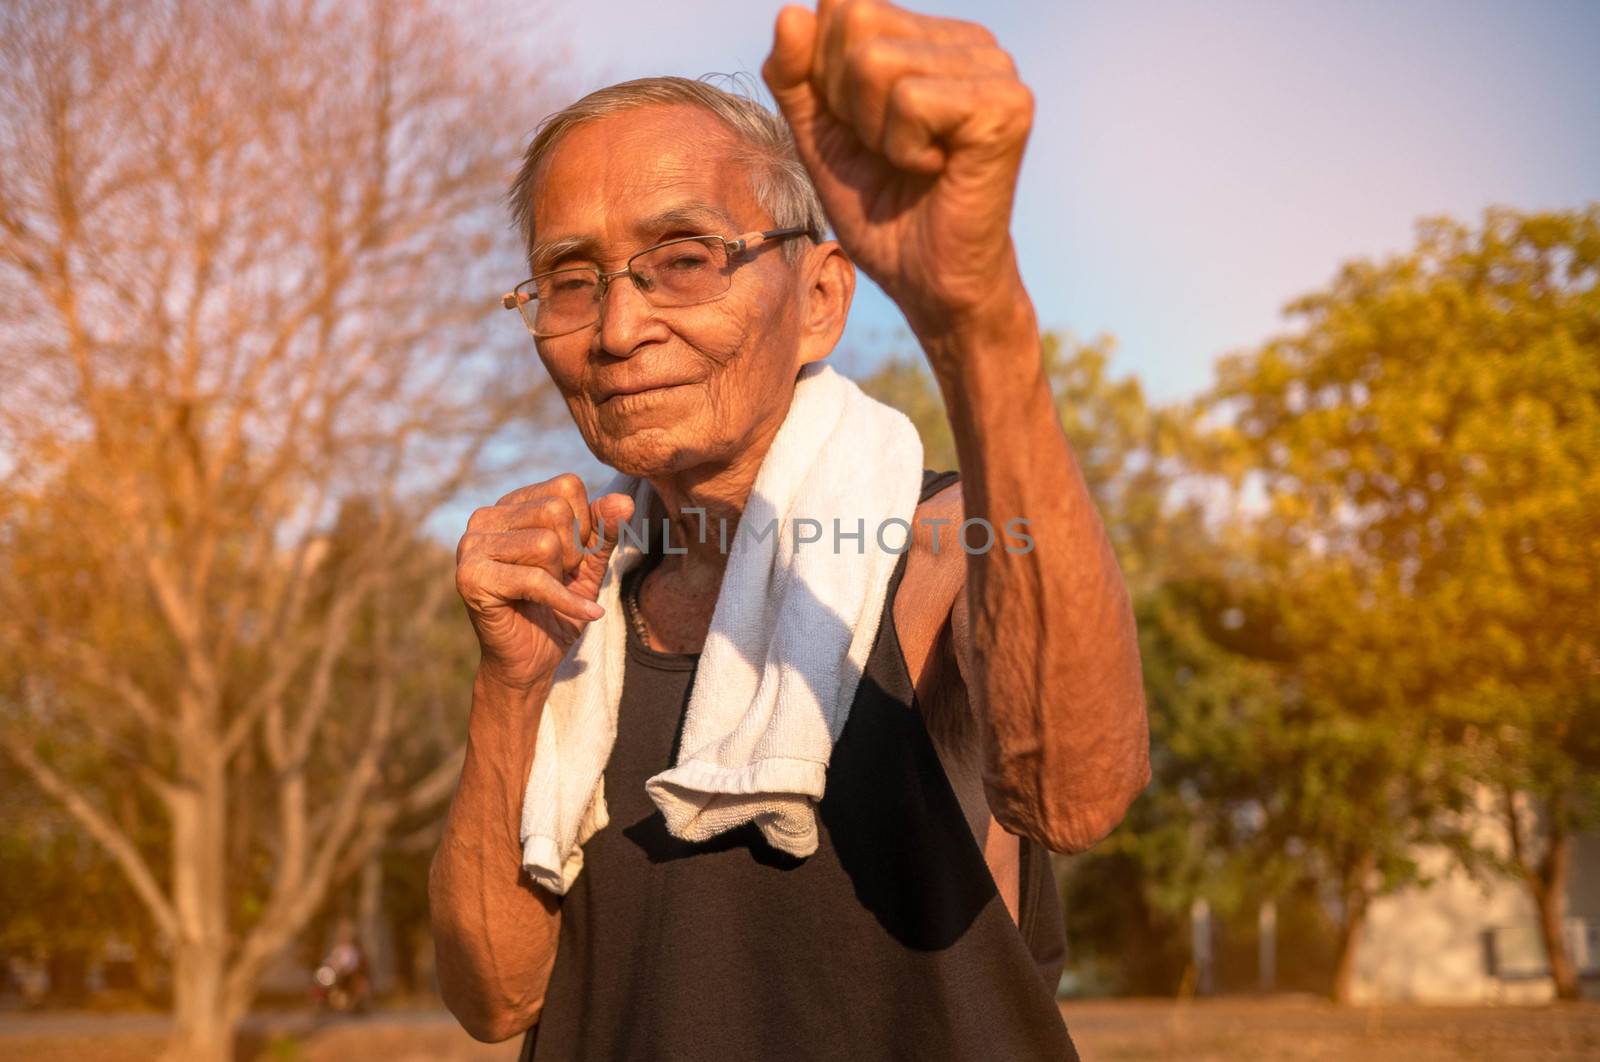 Attractive senior sportive man in boxing stance to exercises in the park for good health. Healthcare concept. by TEERASAK